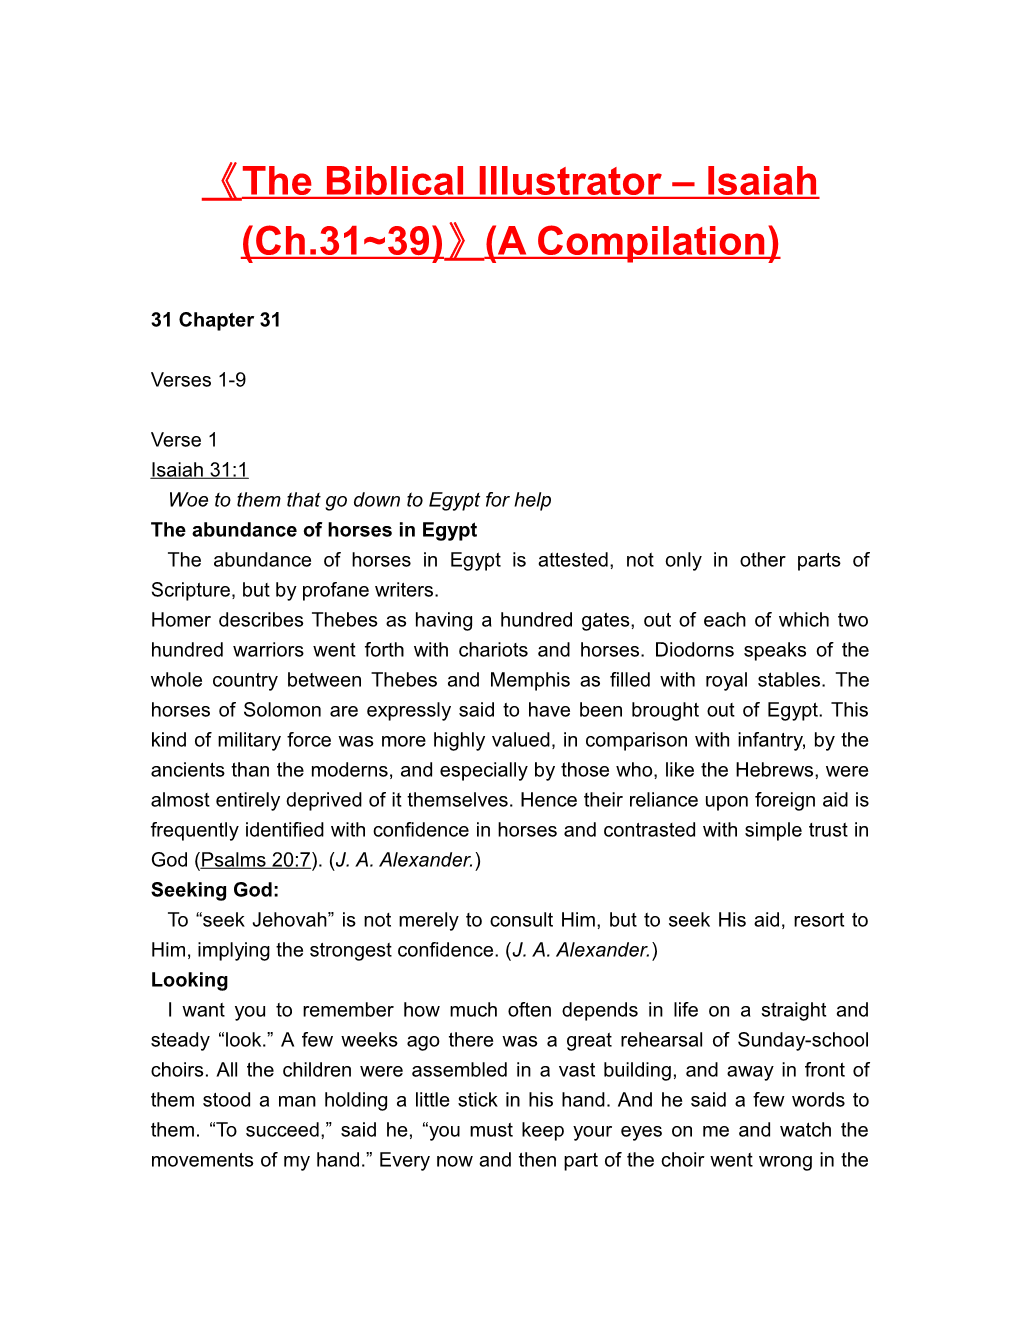 The Biblical Illustrator Isaiah (Ch.31 39) (A Compilation)